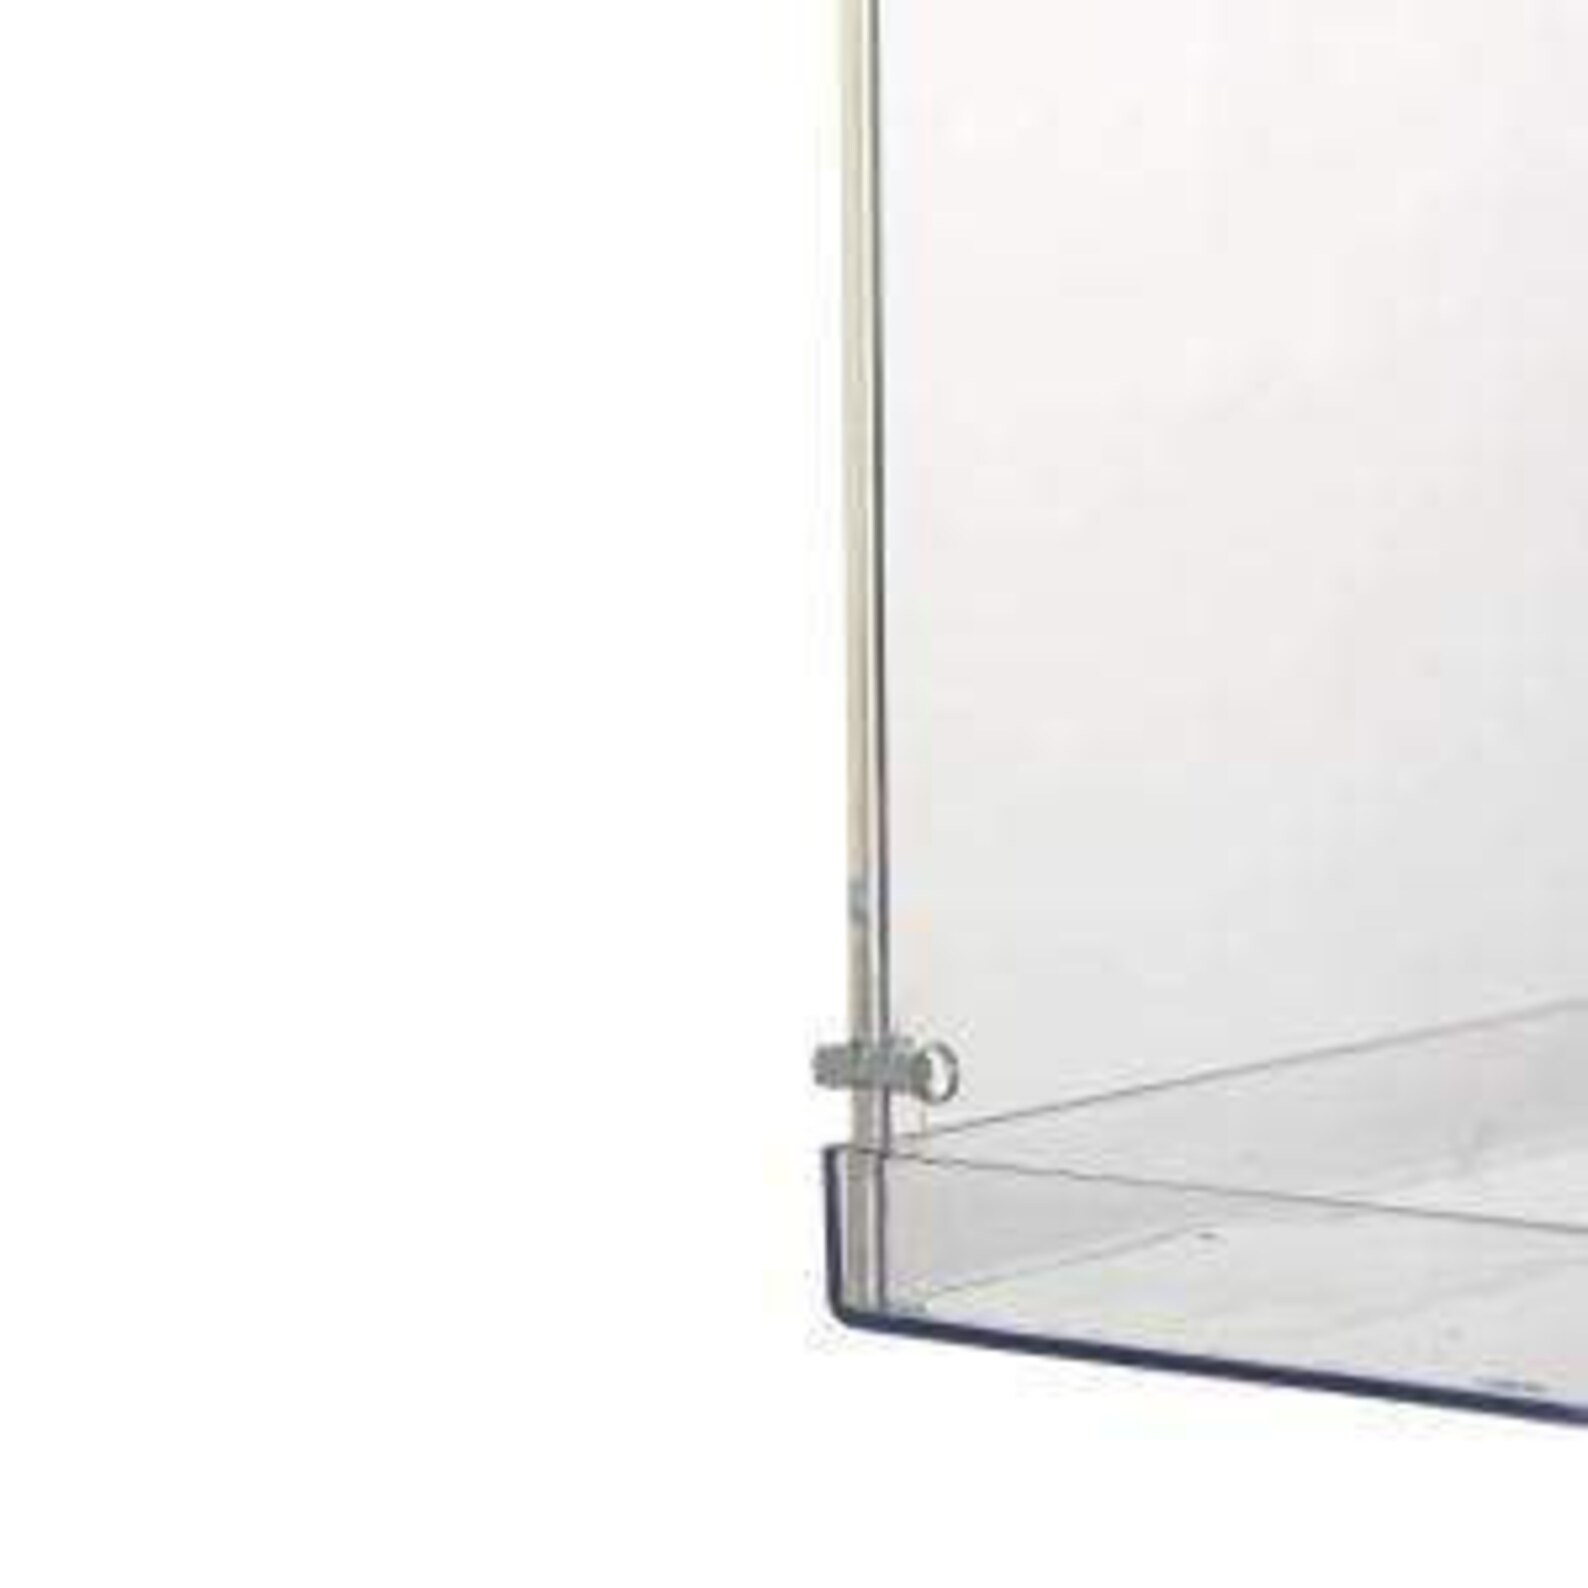 5 Clear Acrylic Display Boxes Centerpieces Pedestal Riser - Etsy